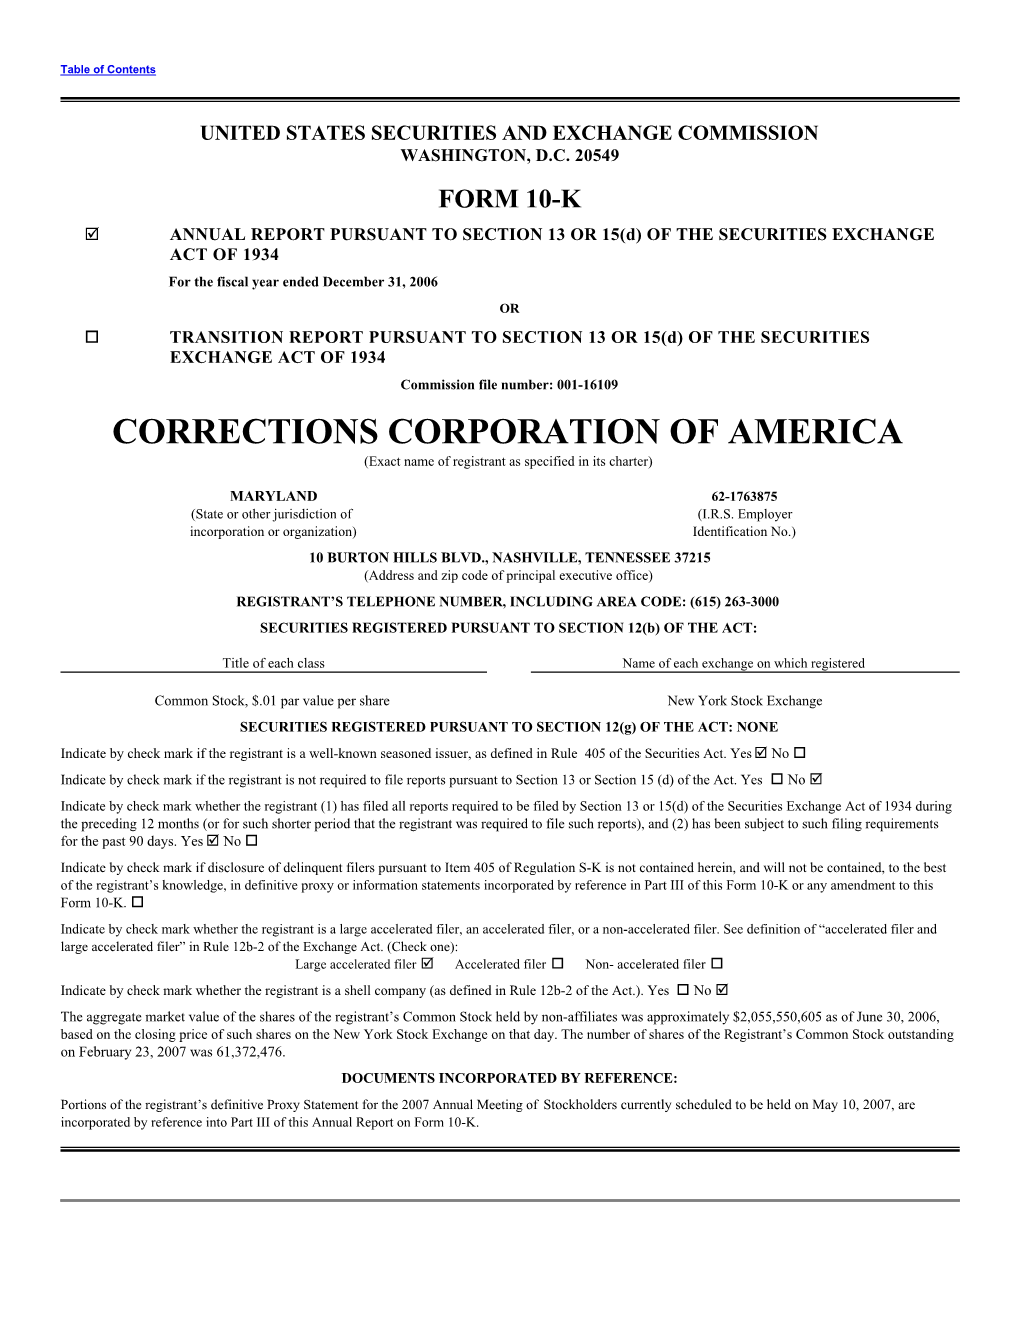 CORRECTIONS CORPORATION of AMERICA (Exact Name of Registrant As Specified in Its Charter)